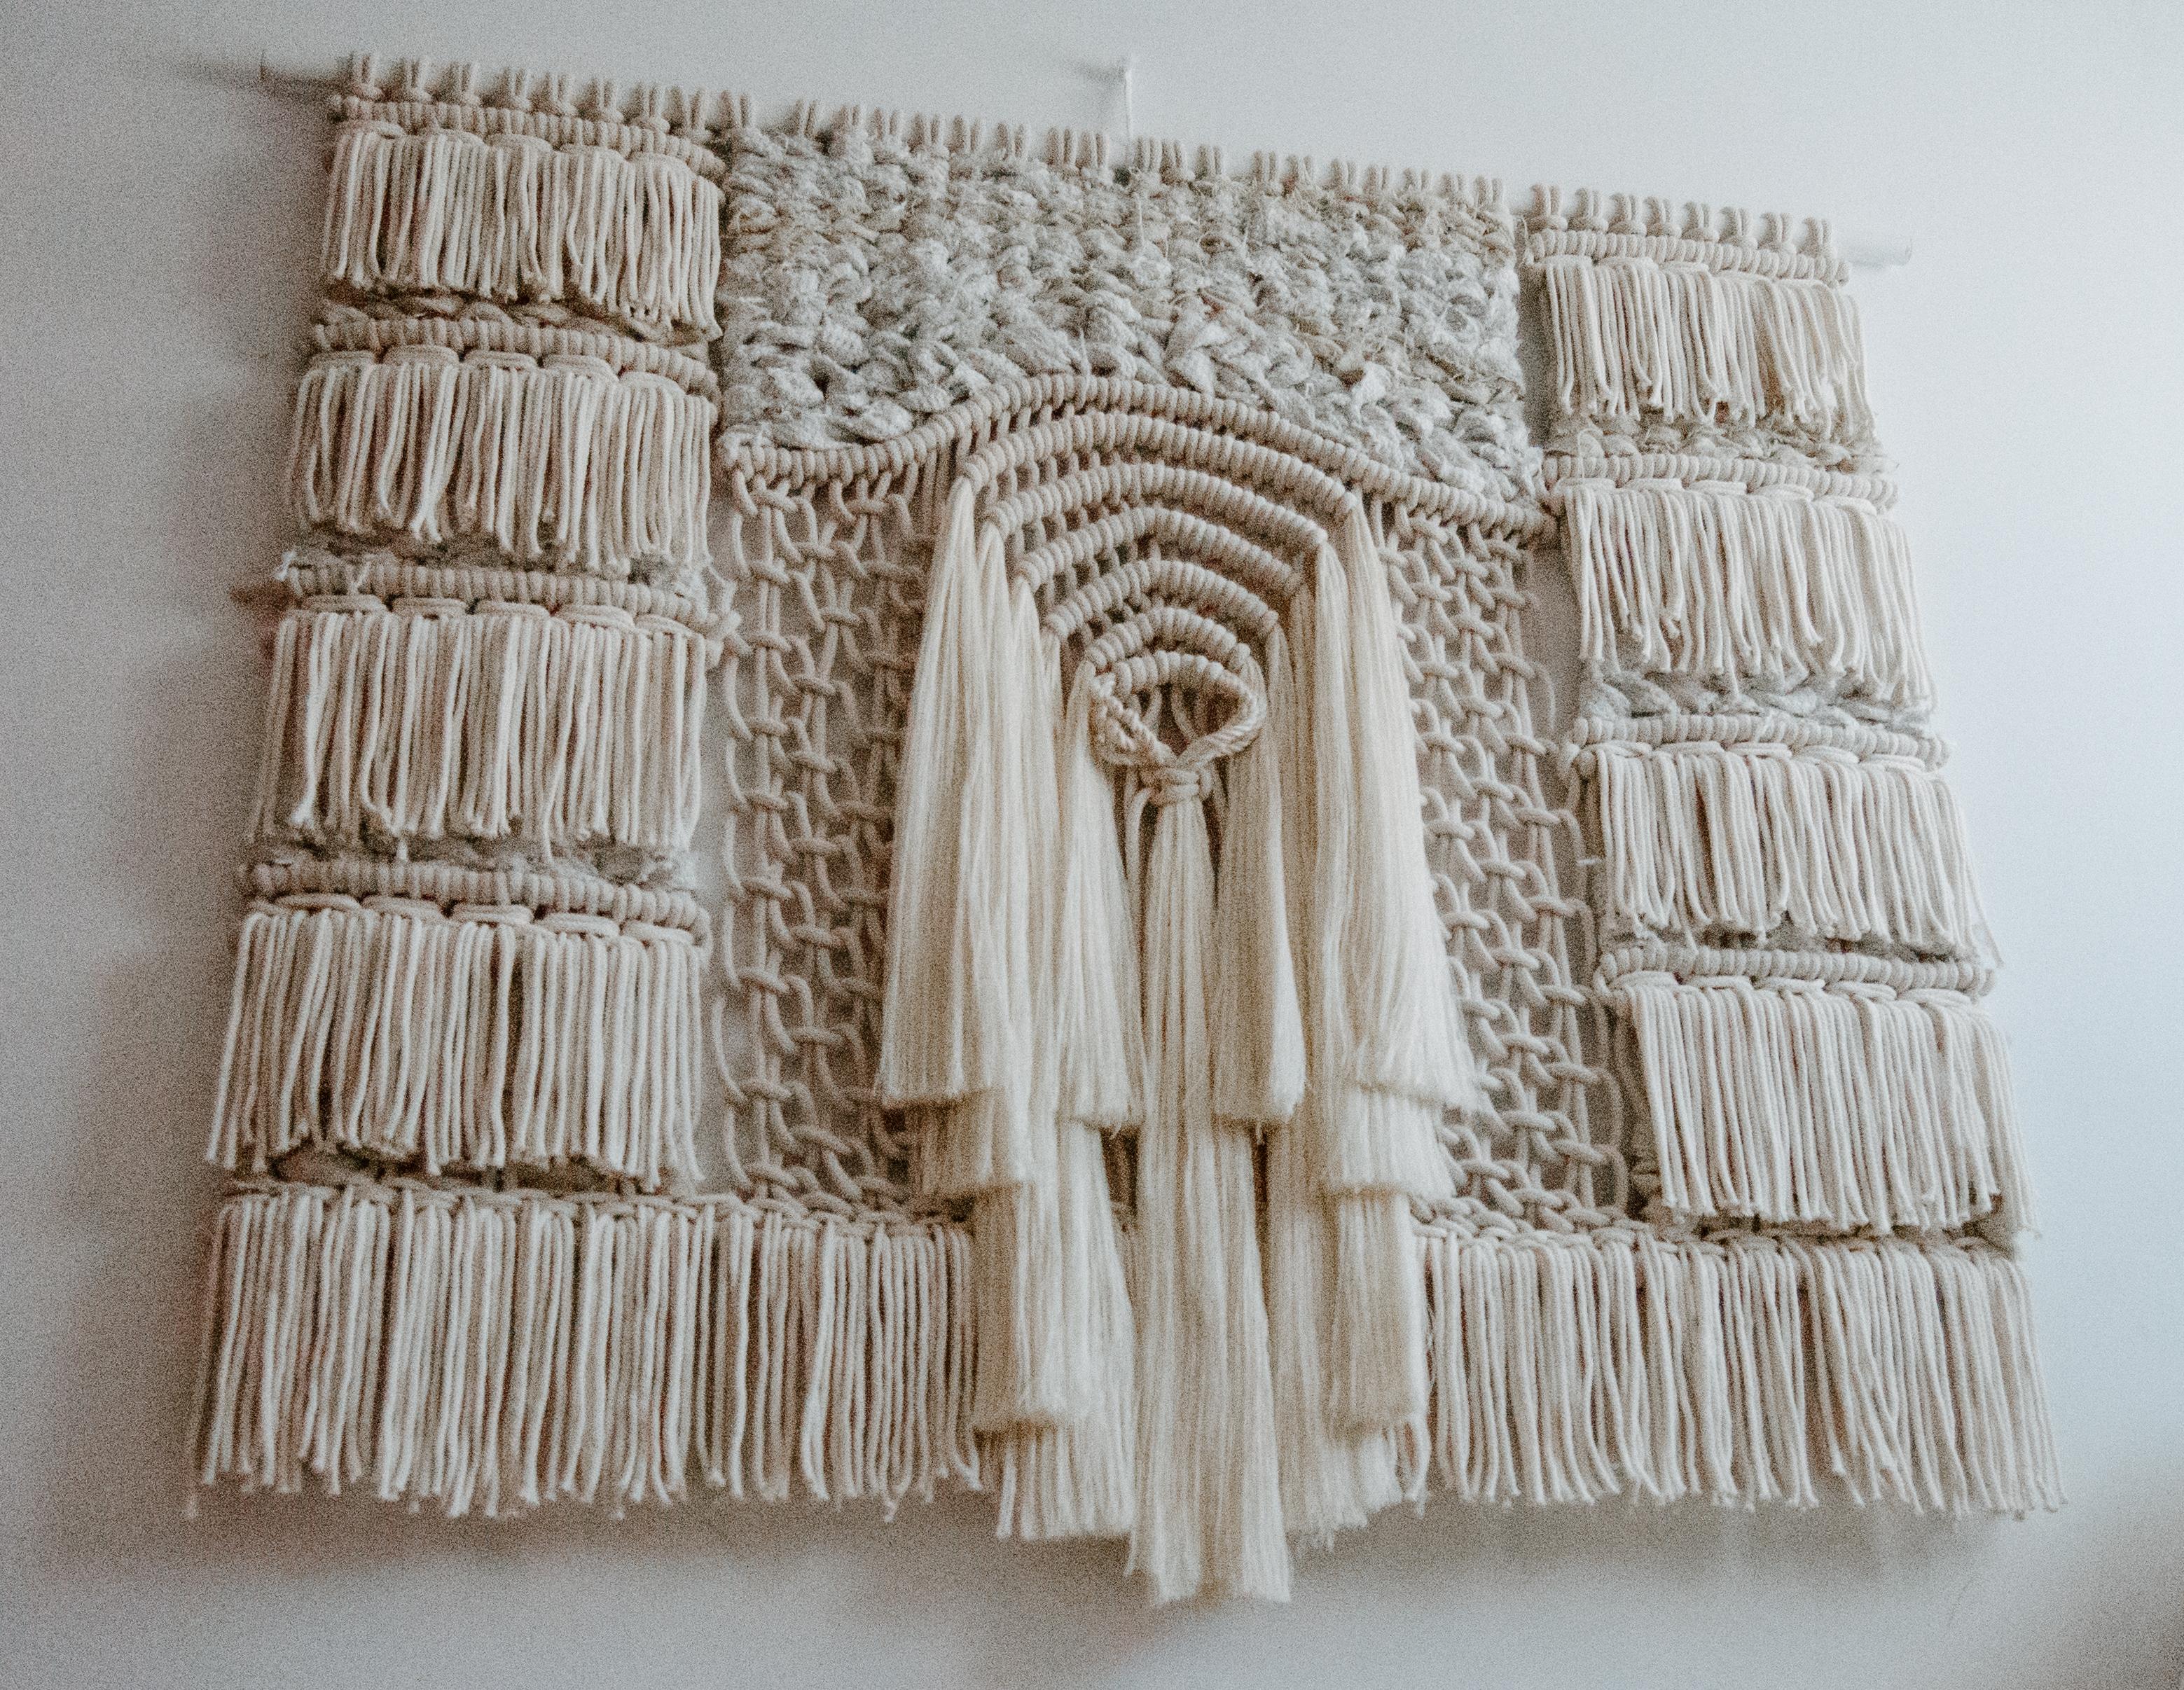 This Macrame Wall Art is the perfect size to display as headboard or hanging above your sofa or entrance to impress your guest with a sophisticated and elegant aesthetic. A beautiful piece of textile art that combines macrame and handwoven